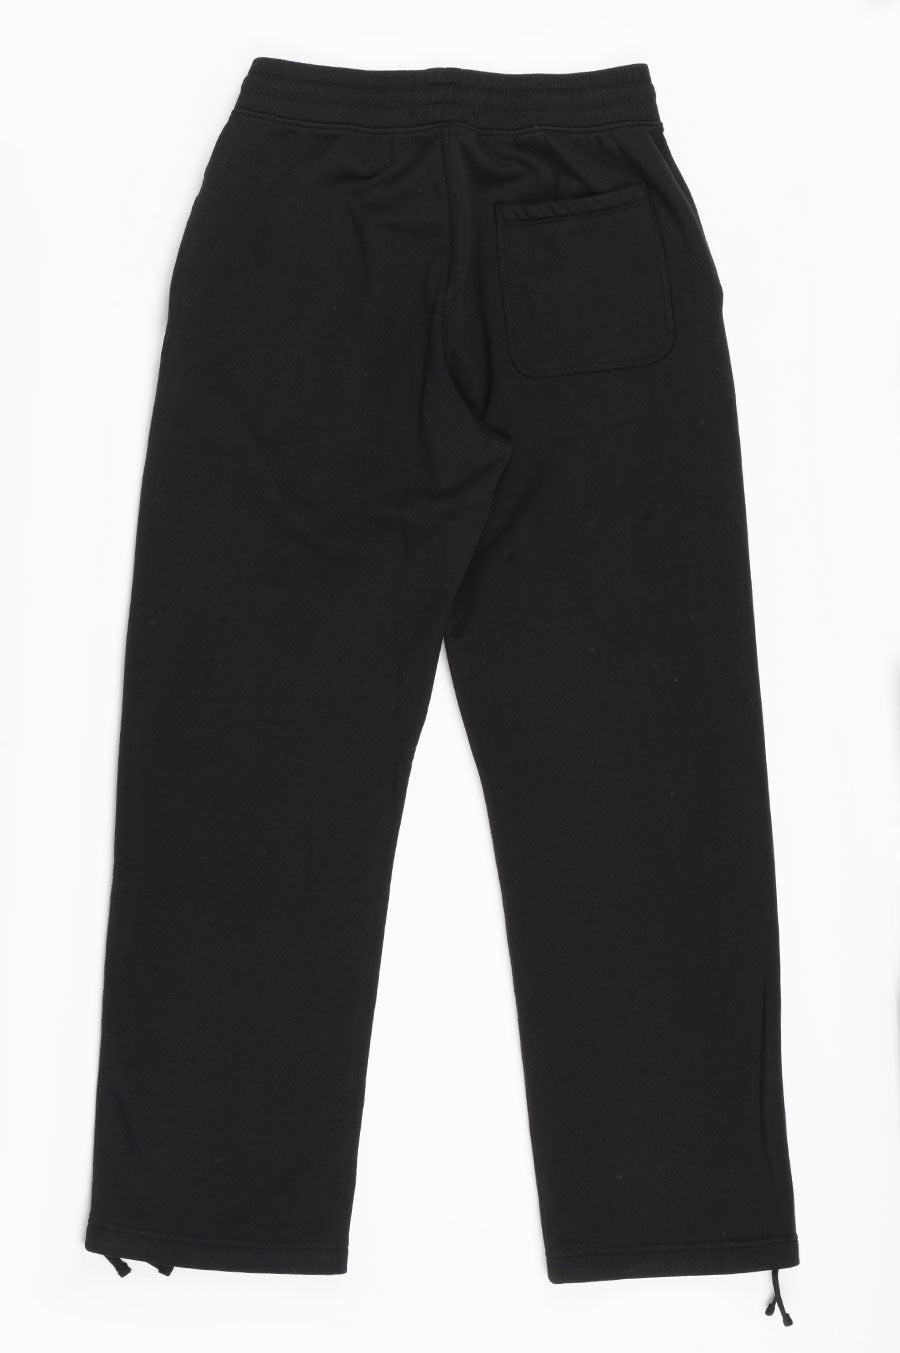 REIGNING CHAMP RELAXED FIT SWEATPANT MIDWEIGHT TERRY BLACK